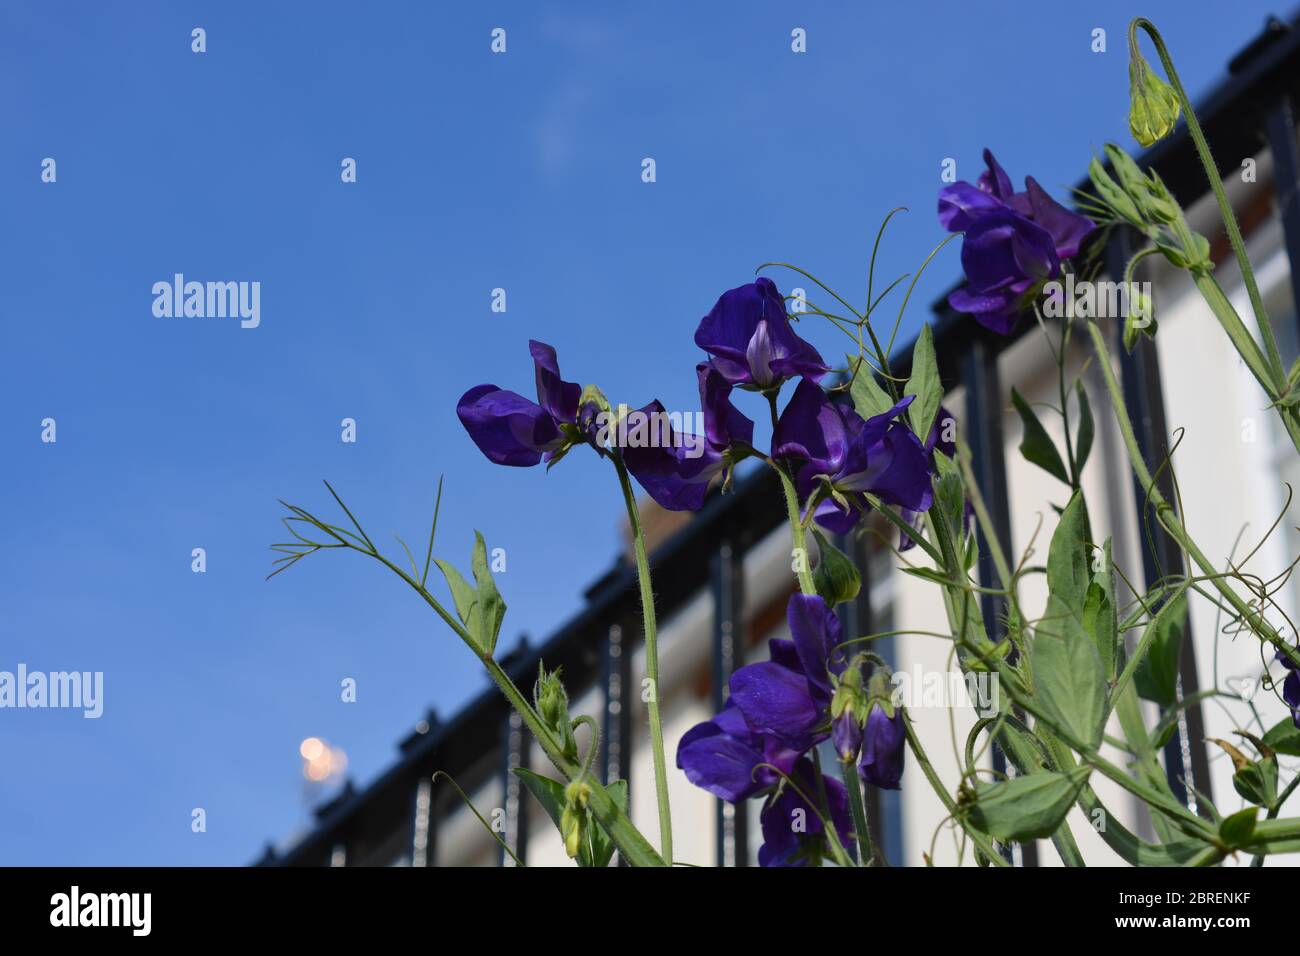 Sweet pea flowers climbing on a wrought iron railing in an urban setting against blue sky Stock Photo